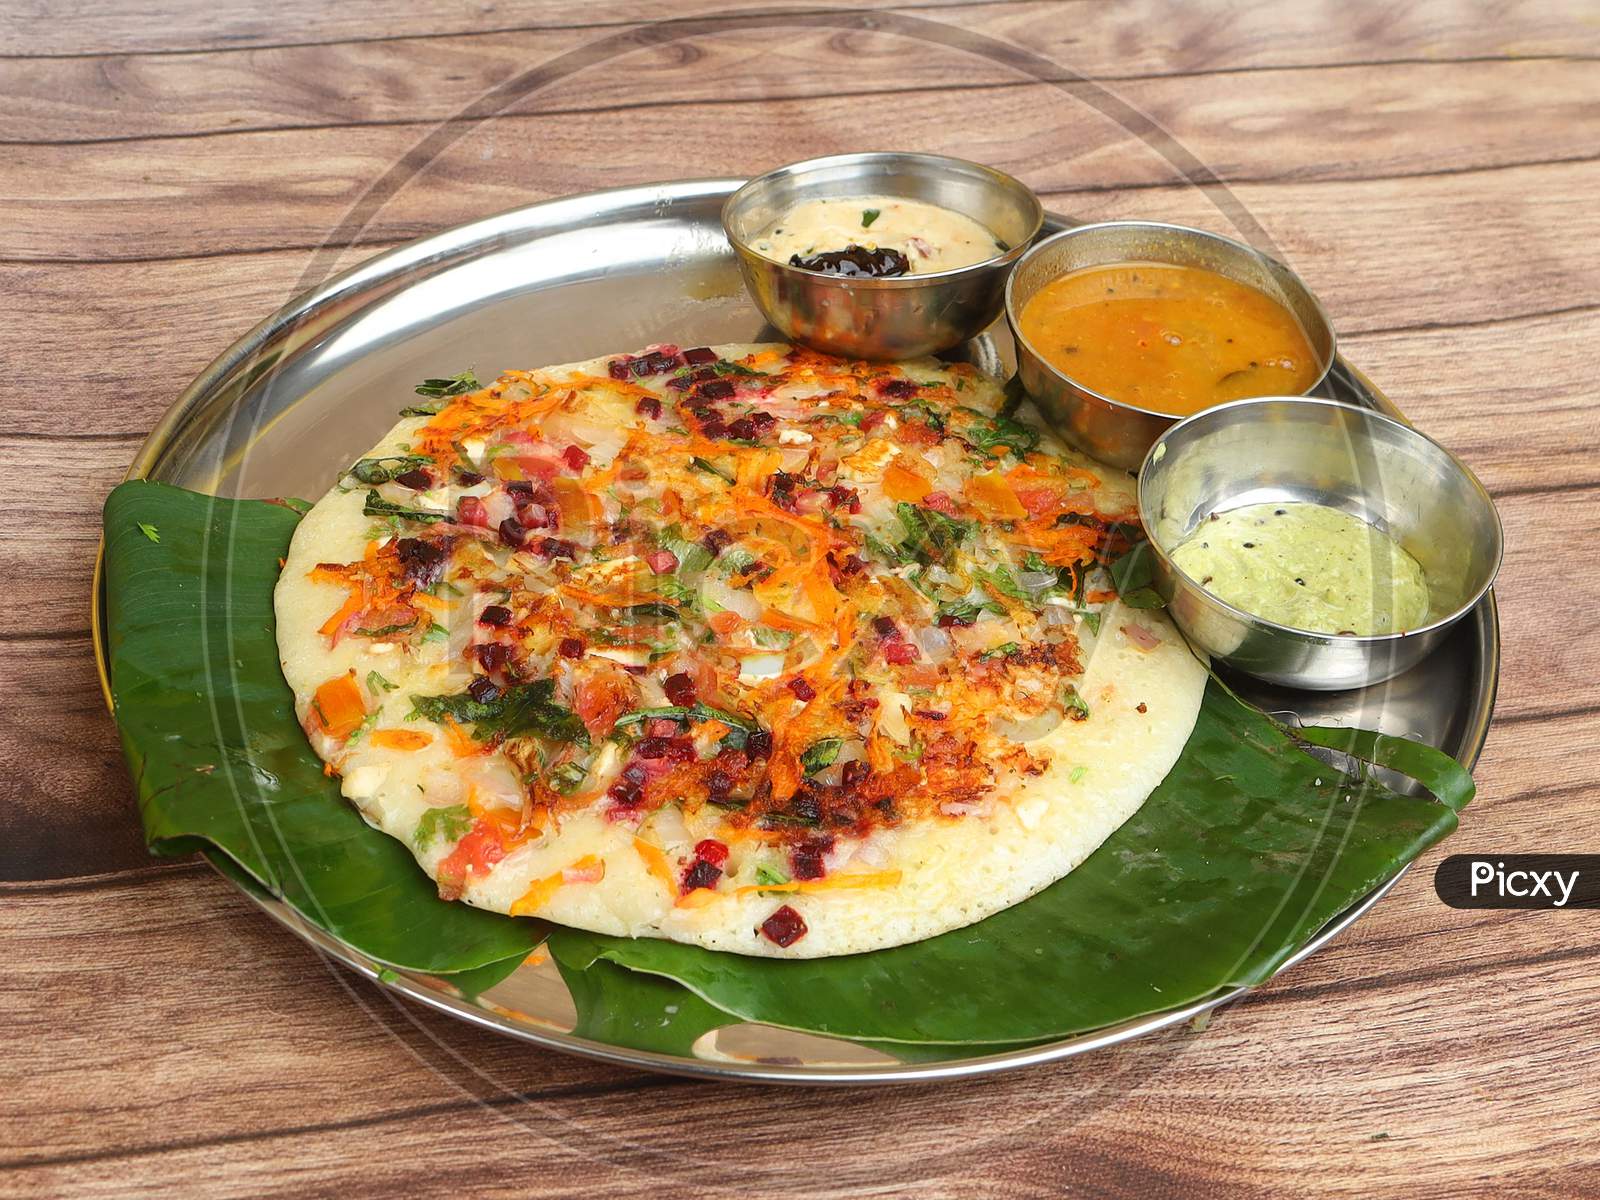 Famous South Indian Food Uttapam Or Ooththappam Is A Dosa Like Dish Made By Dosa Batter, Served With Coconut Chutney And Sambar, Selective Focus